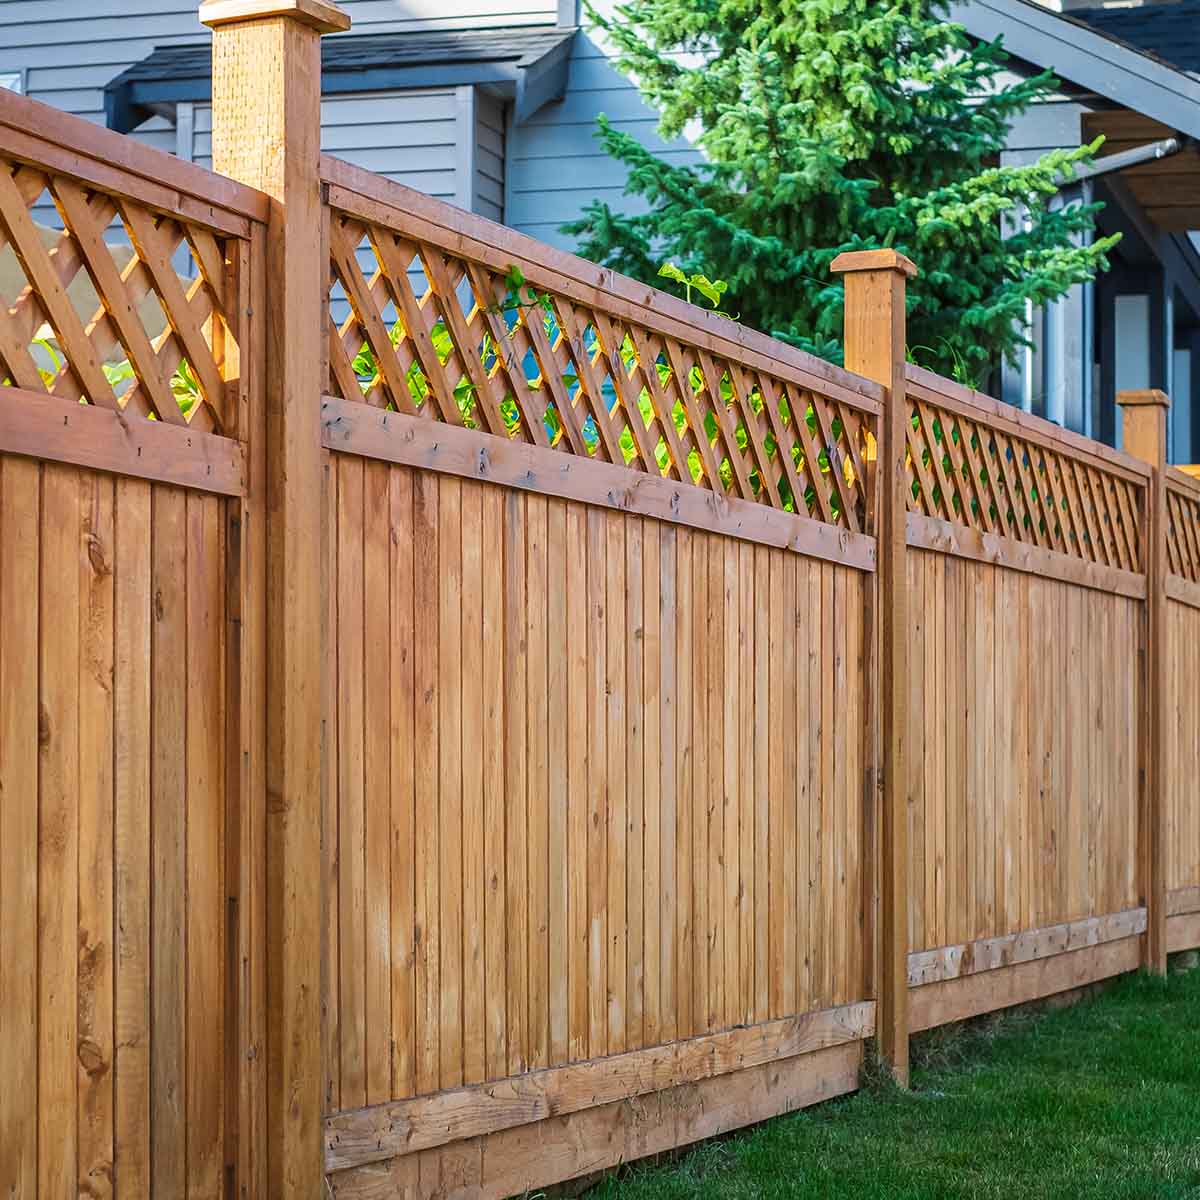 Residential Fence Washing, Painting, and Staining Services from NC Paint and PowerWash